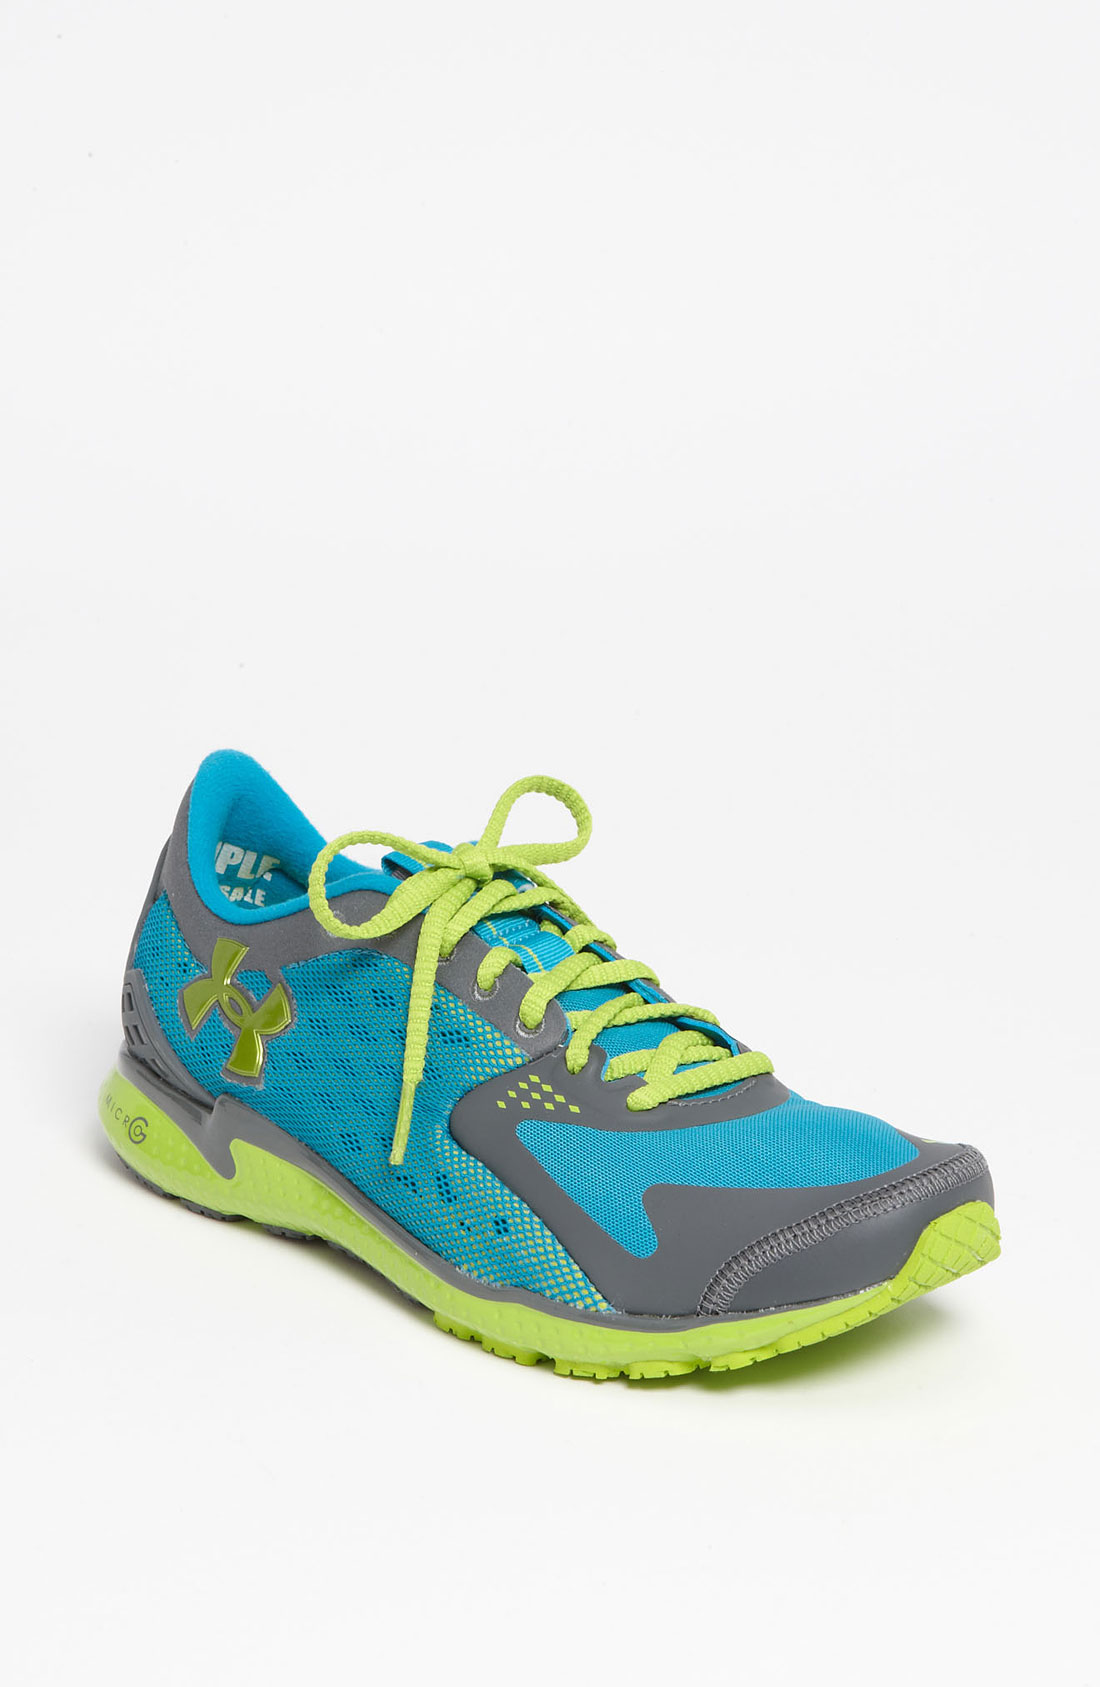 Under Armour Micro G Defy Running Shoe in Blue (blue/ graphite/ lime ...